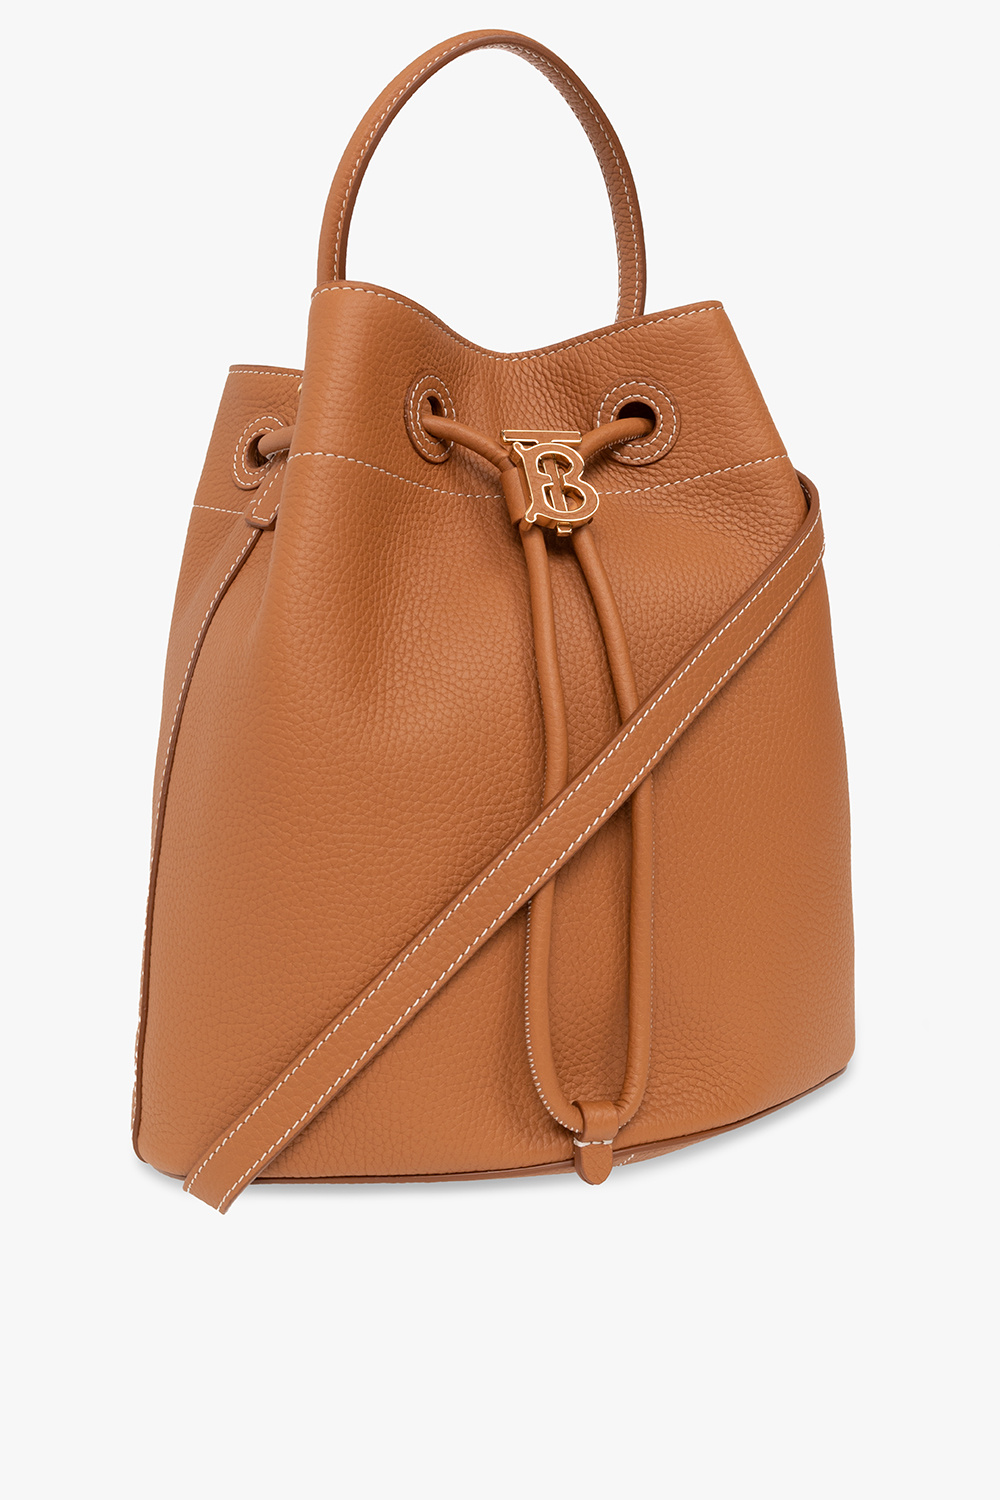 burberry check-pattern Leather bucket bag